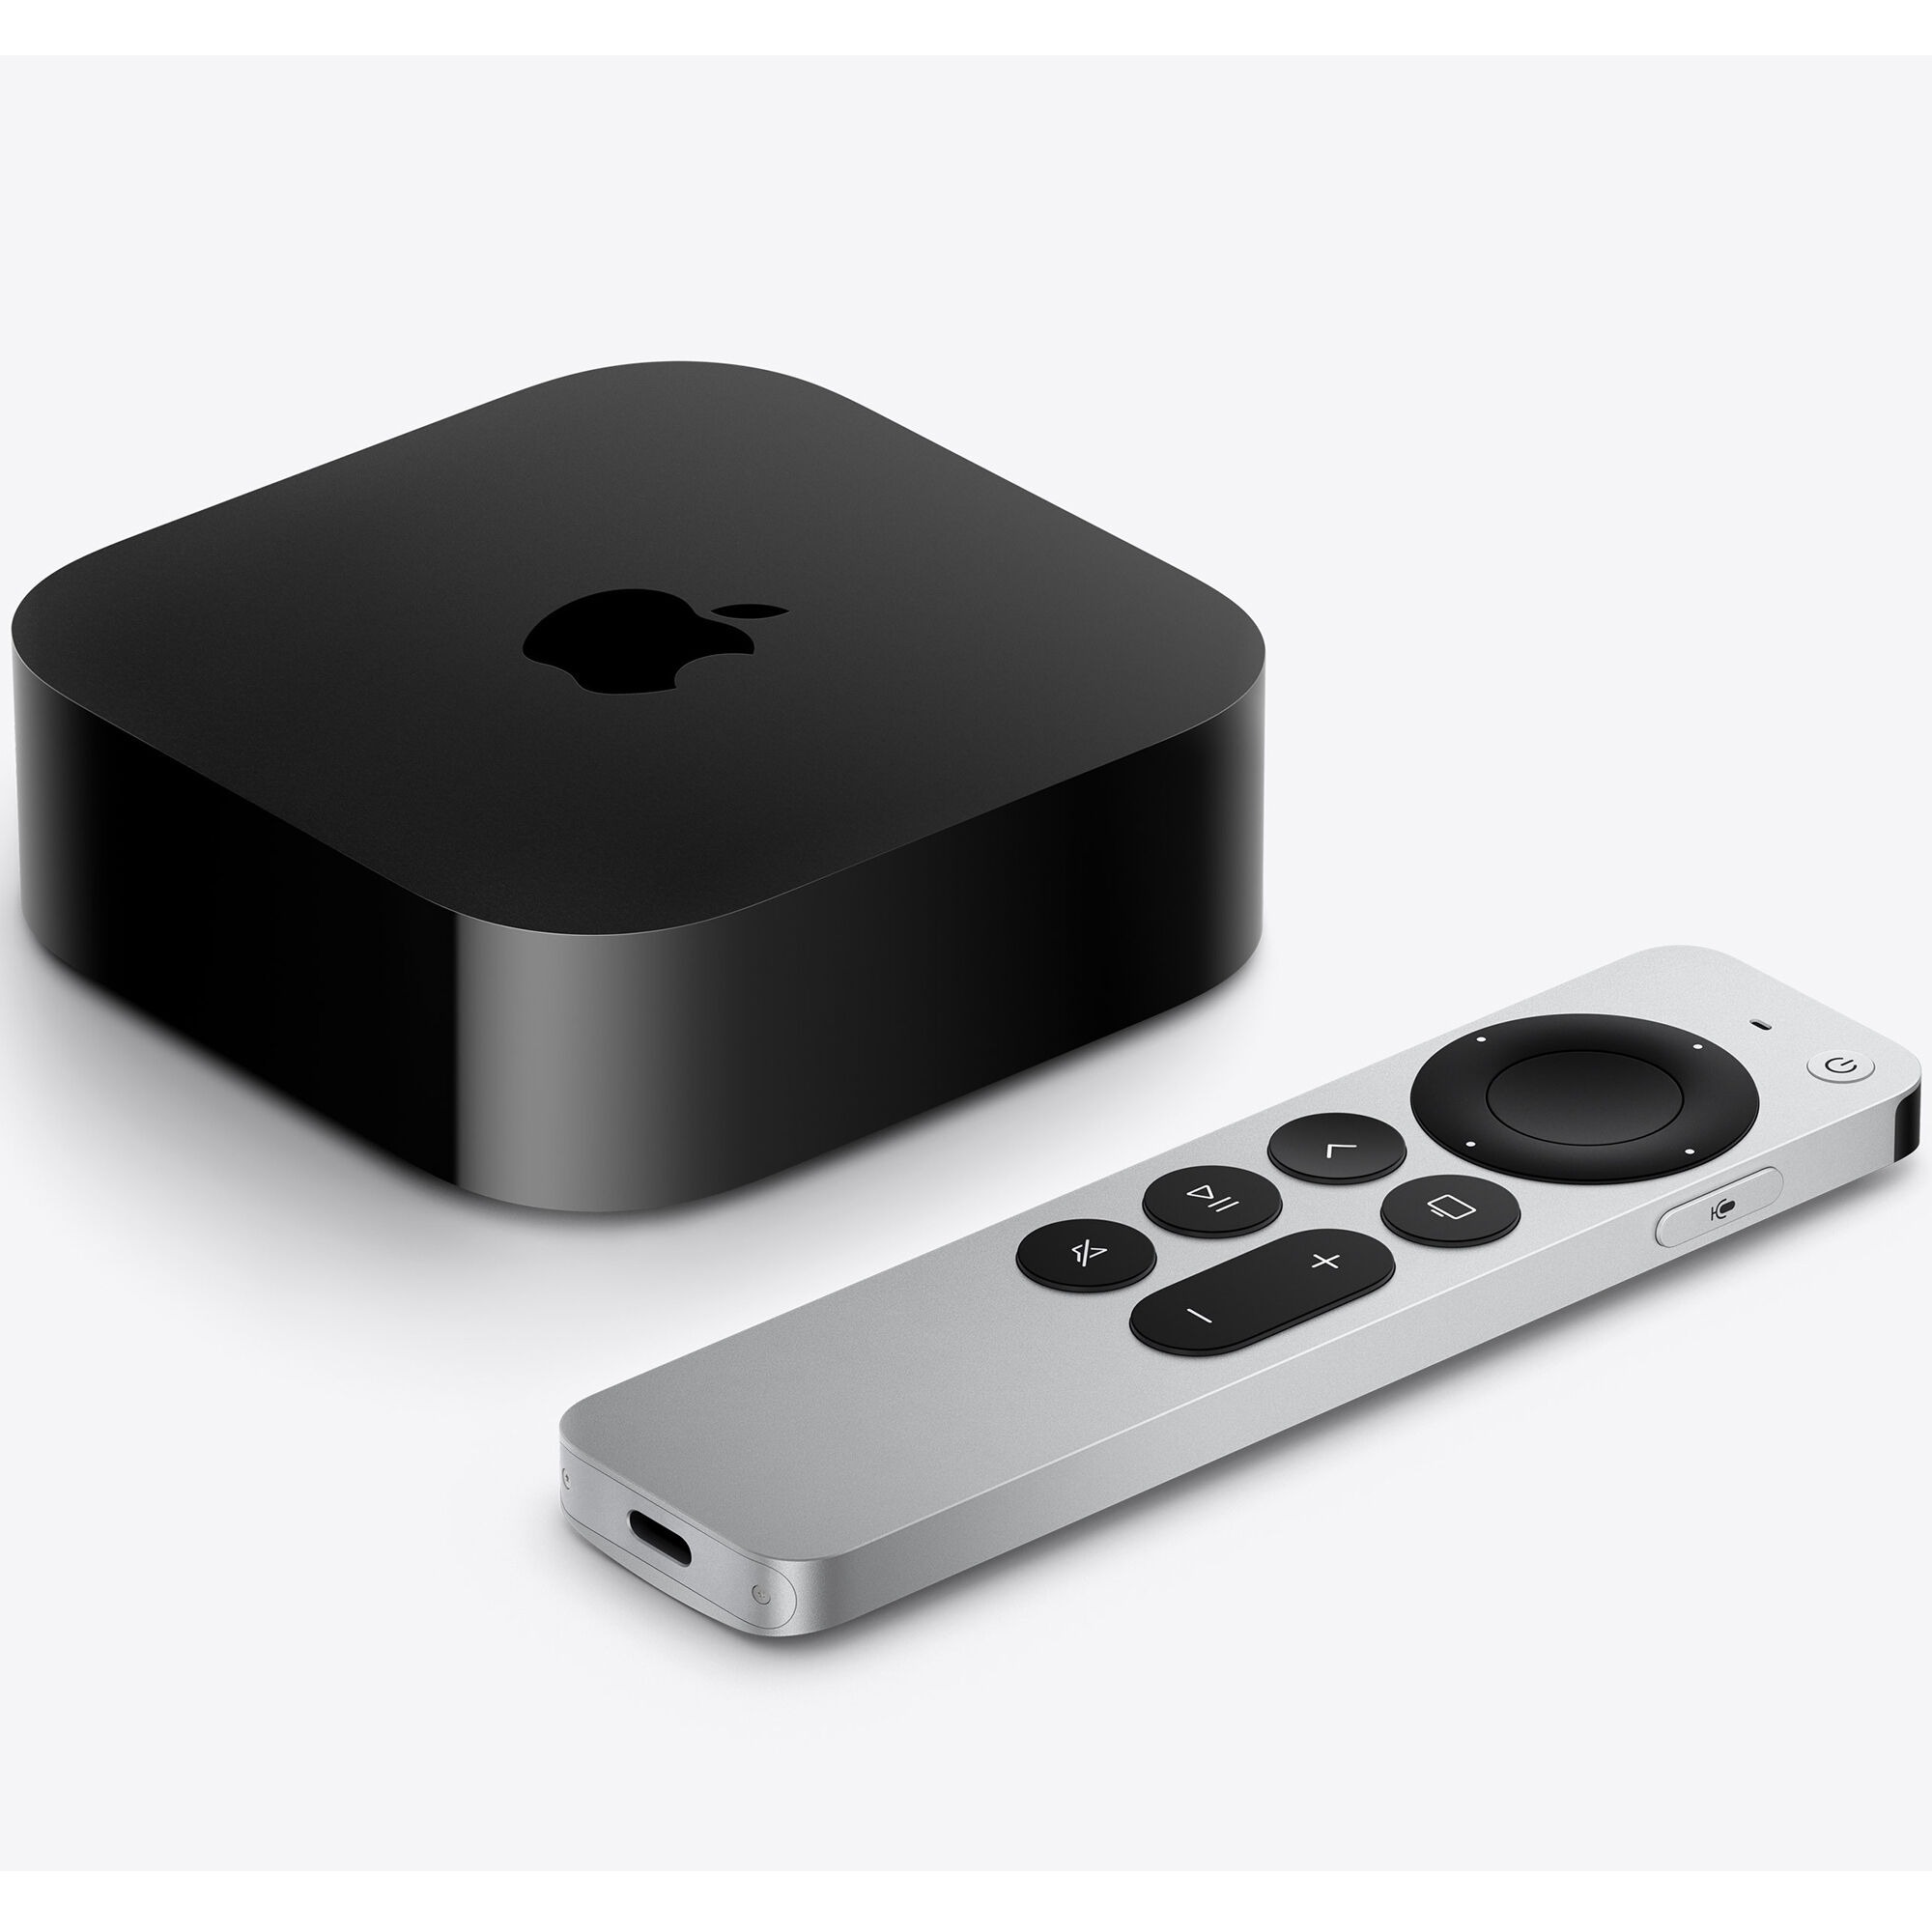 Apple TV 4K, 128GB, Wifi + Ethernet with Thread Networking support 